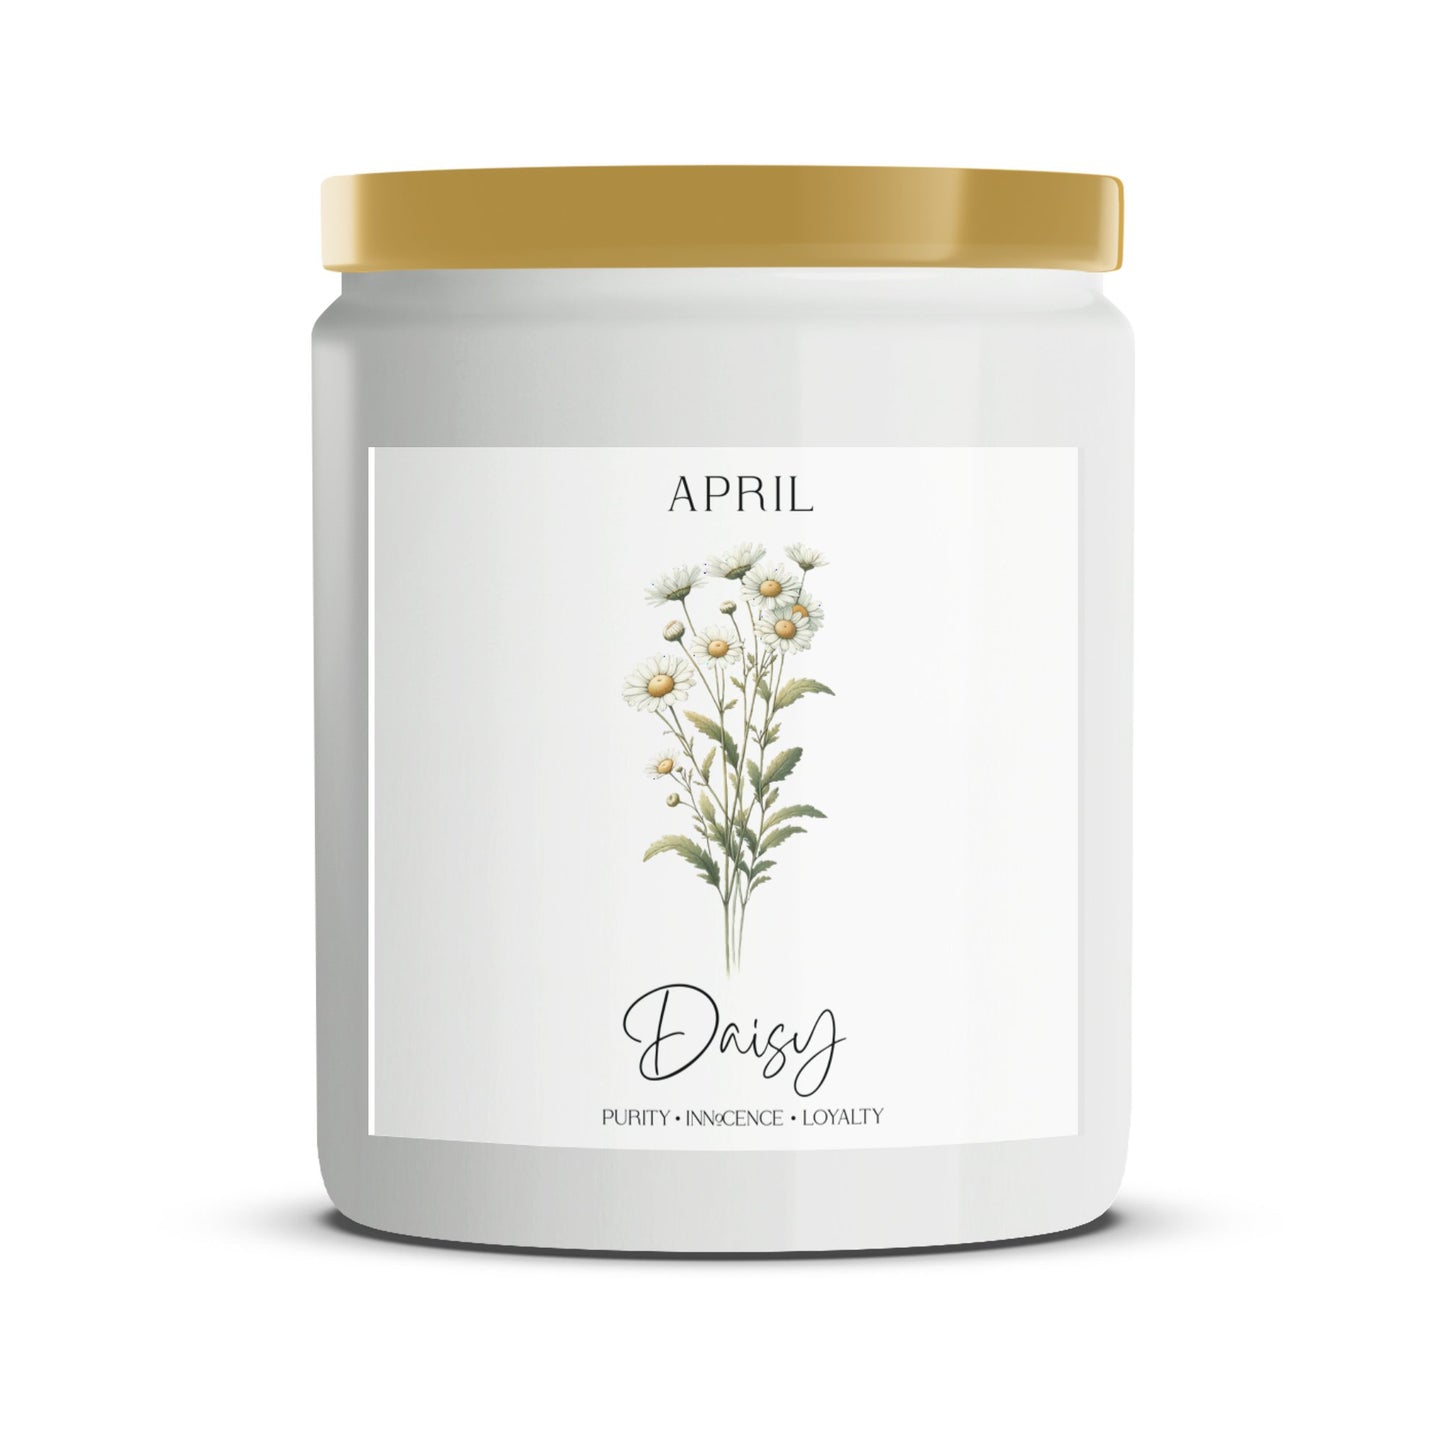 April Daisy Scented Candle, Floral Spring Aroma, Botanical Home Decor, Gift for Mother's Day - Mardonyx